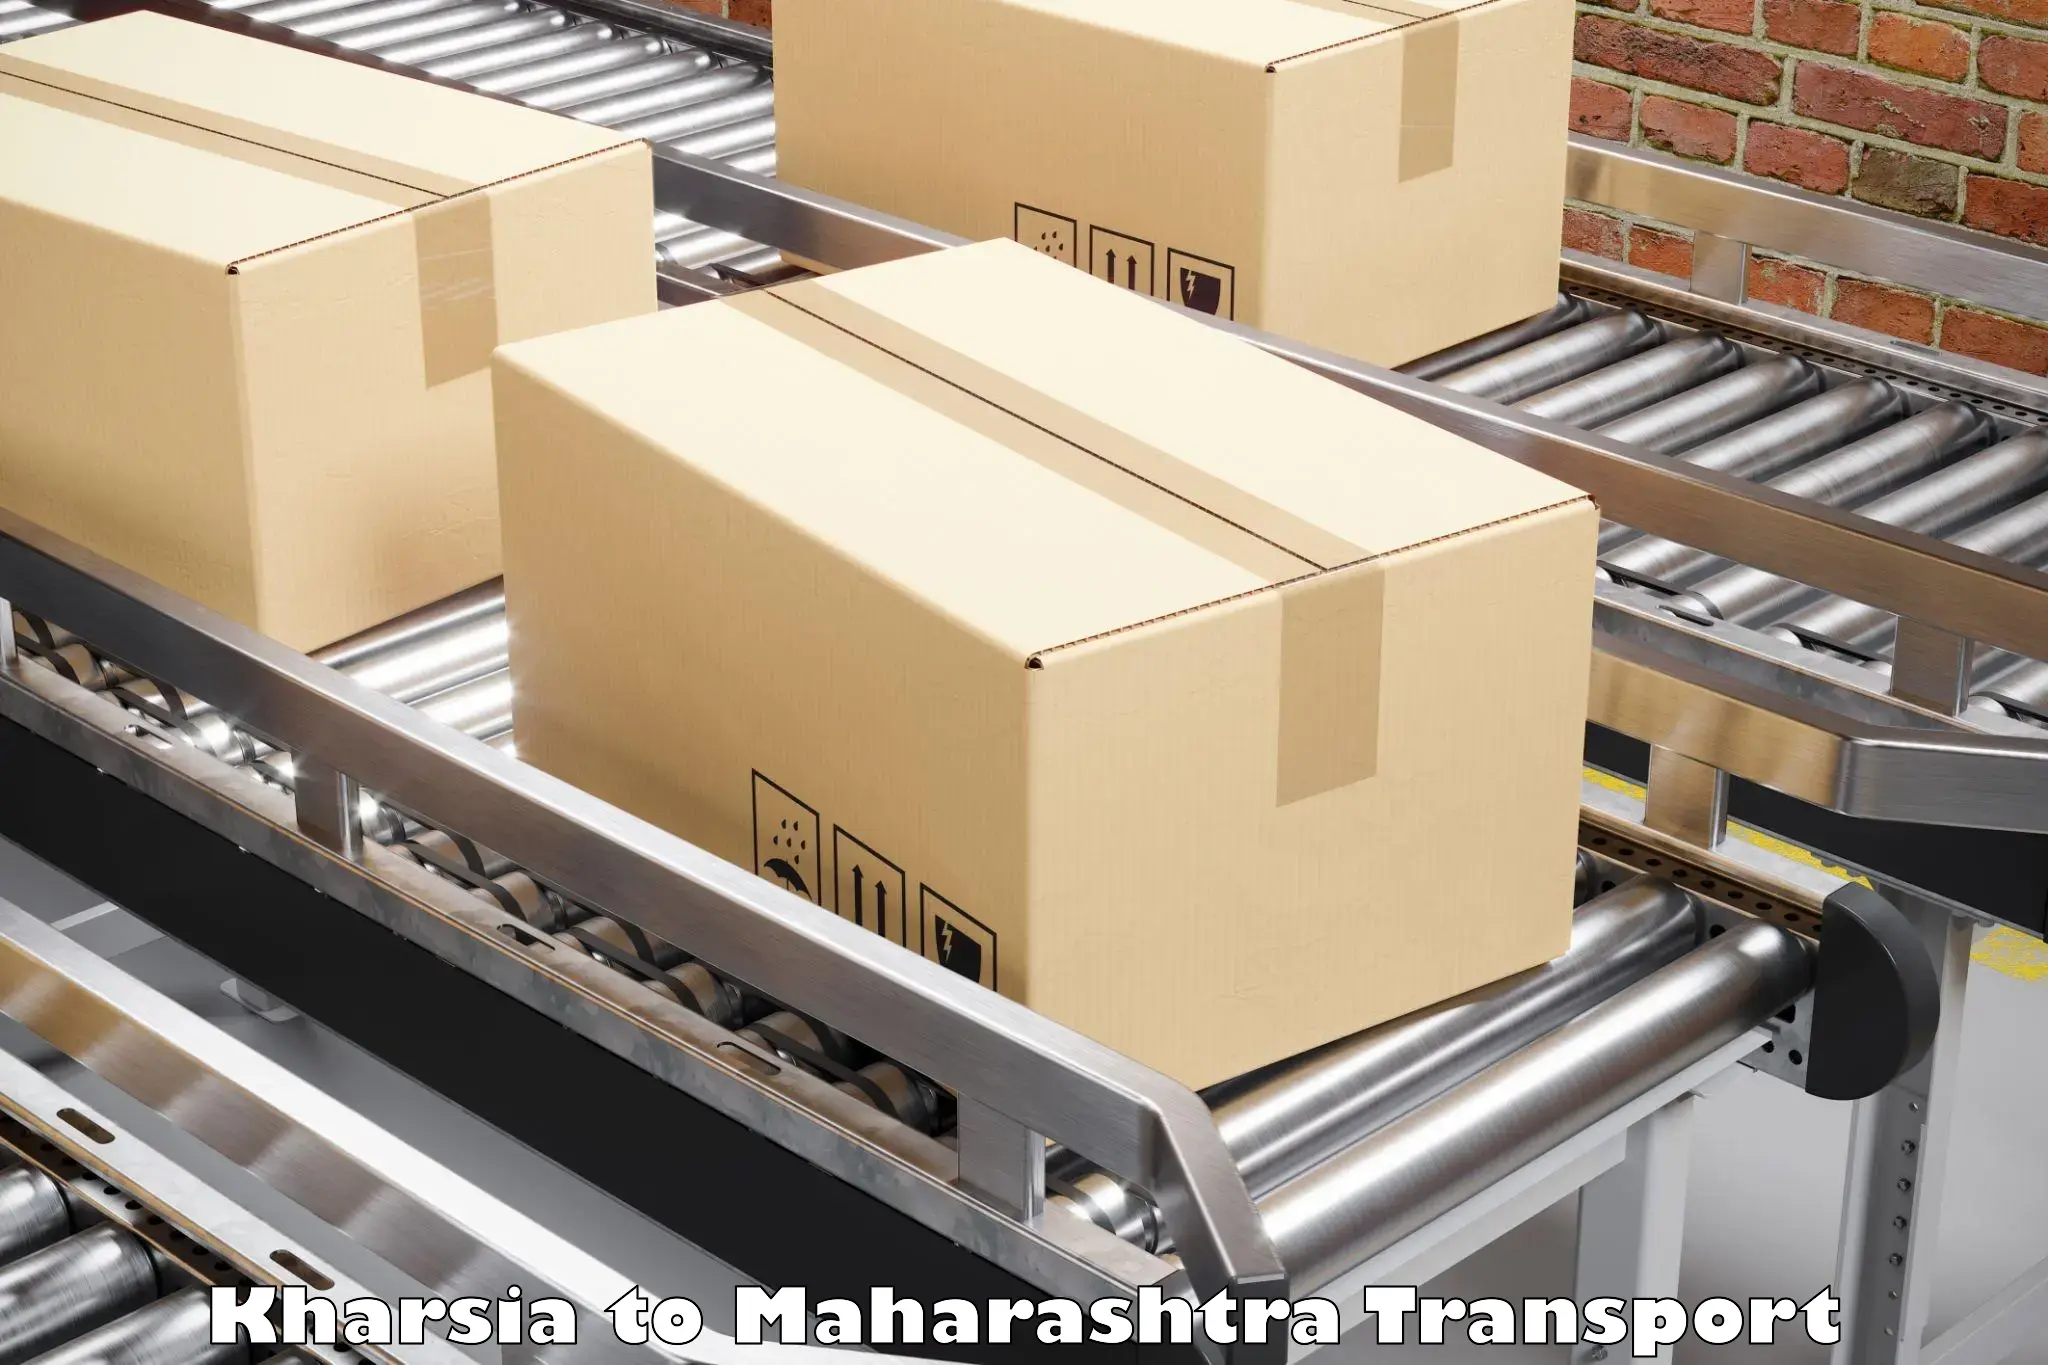 Domestic goods transportation services Kharsia to Talere